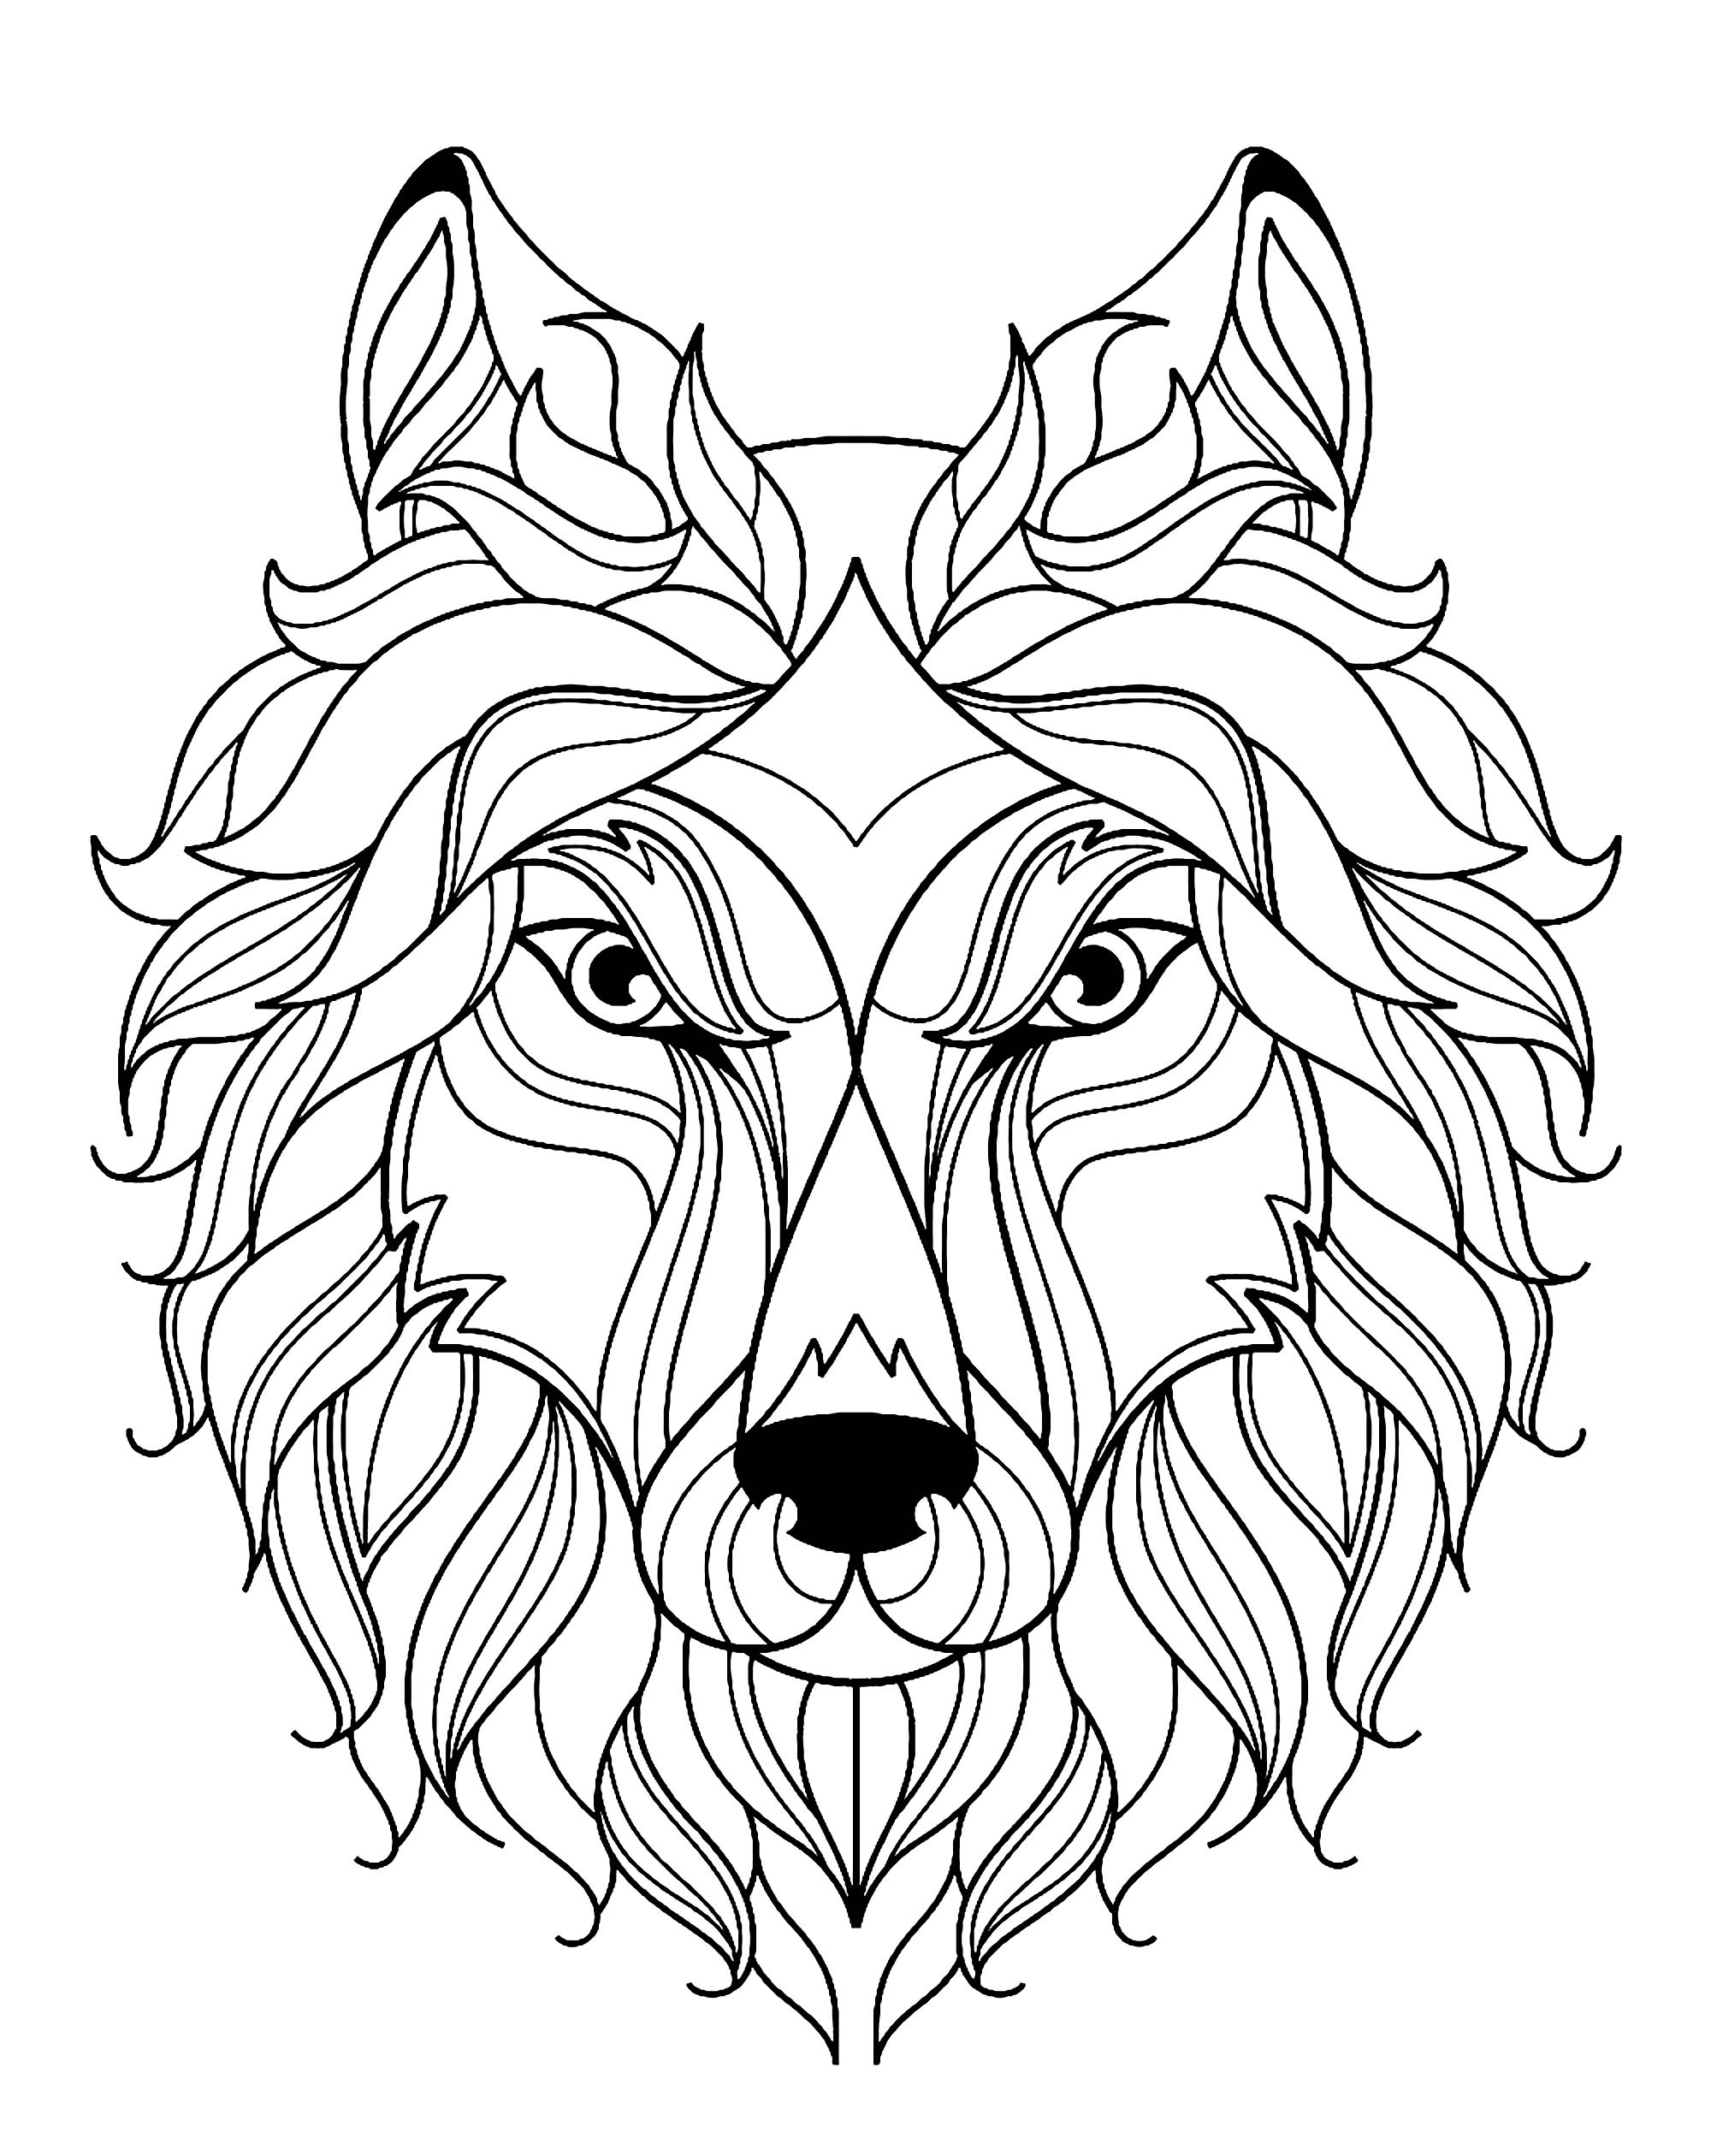 Download Big wolf head simple - Wolves Adult Coloring Pages